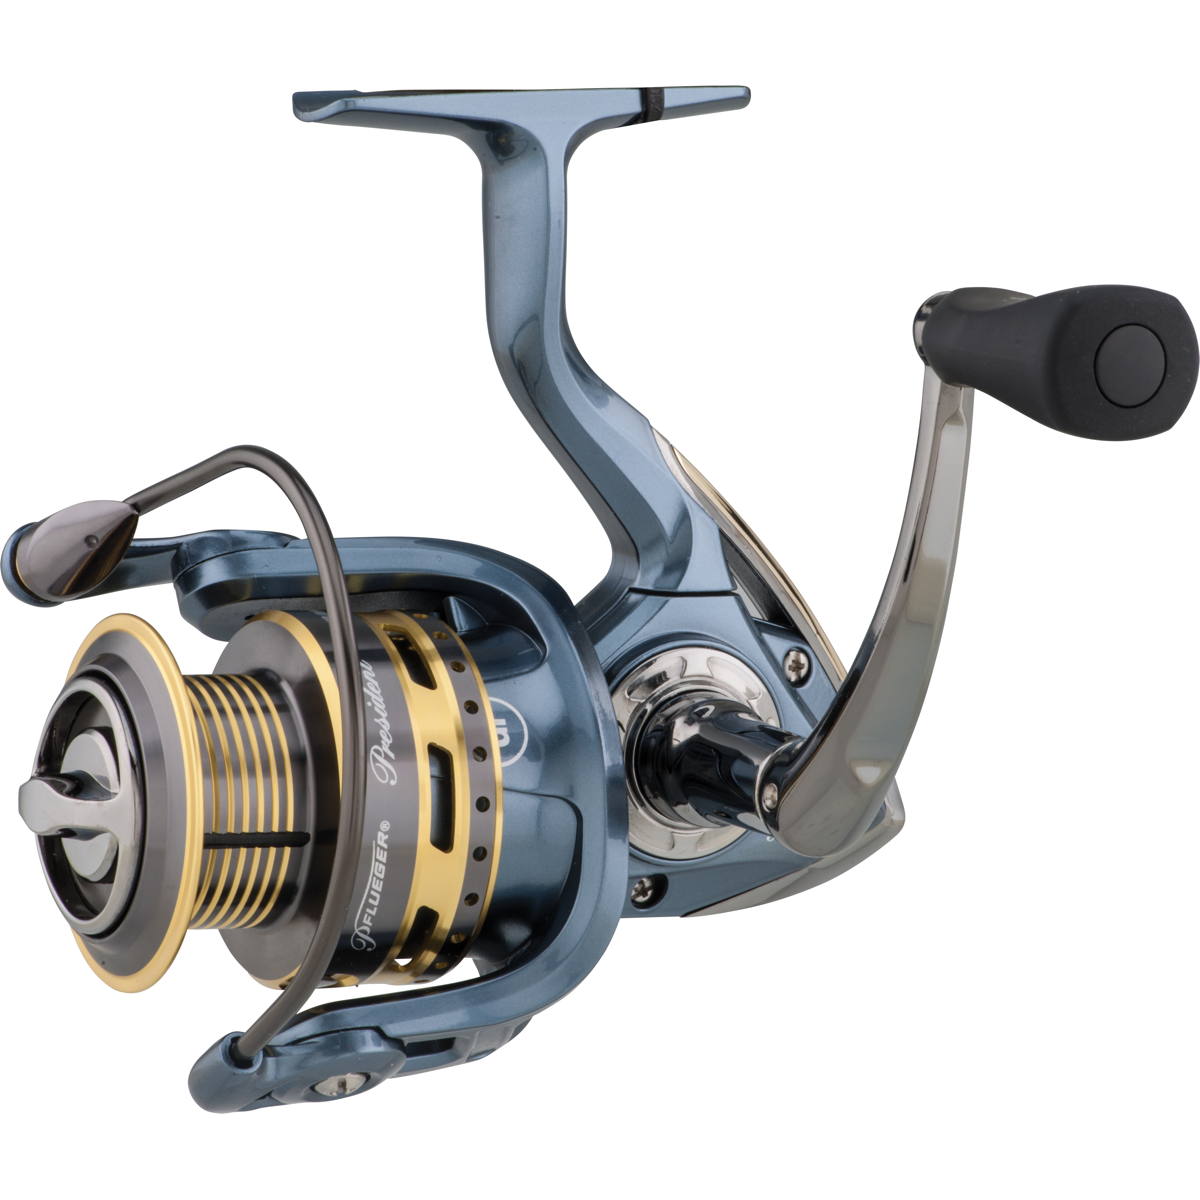 Photo of Pflueger President spinning fishing reel for sale at United Tackle Shops.